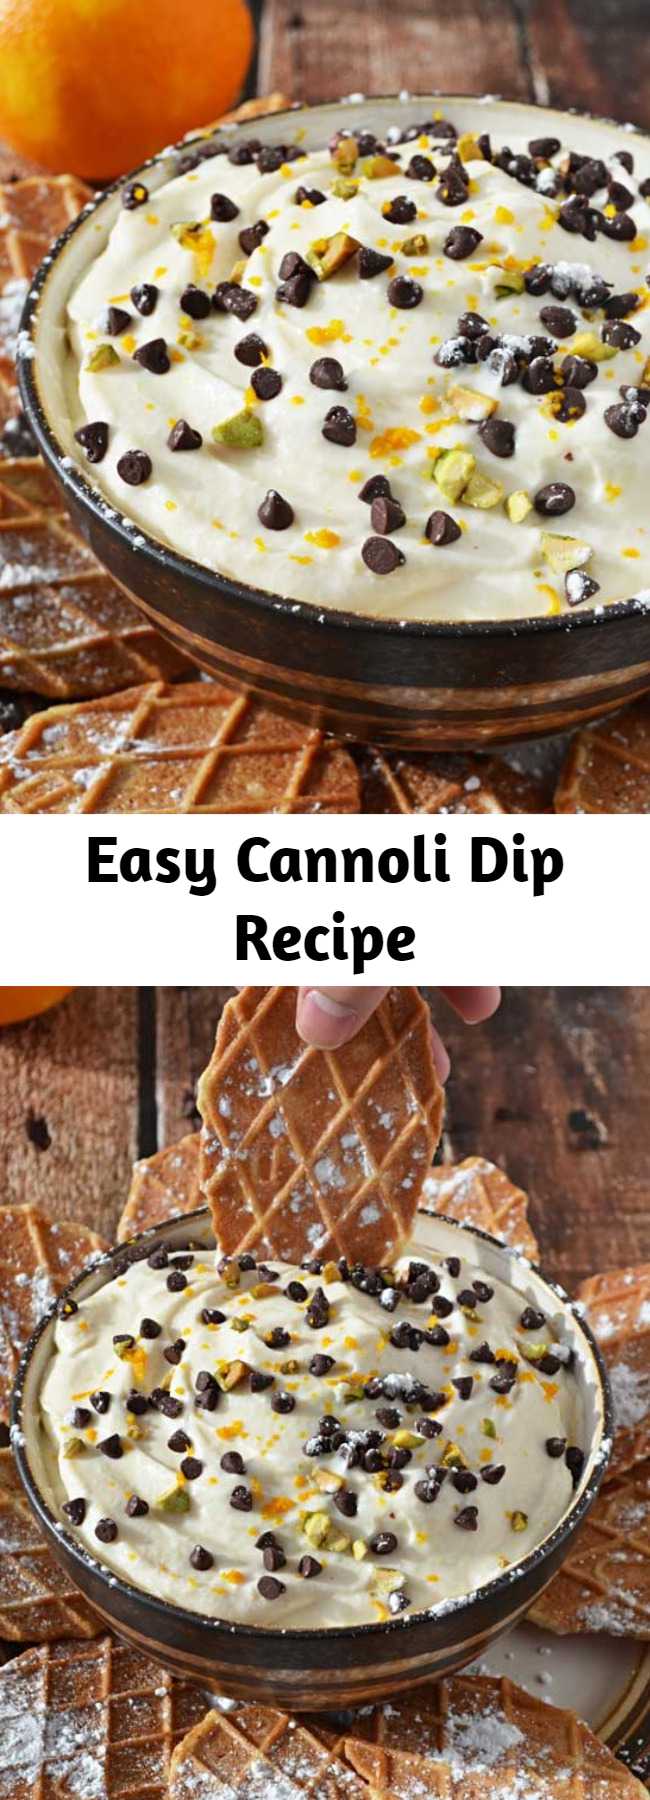 Easy Cannoli Dip Recipe - This recipe is perfect for any party, and with the Super Bowl coming up, it’s great for those who want something sweet and light (and insanely easy to make). Serve this dip with wafers, strawberries, or graham crackers, and enjoy!